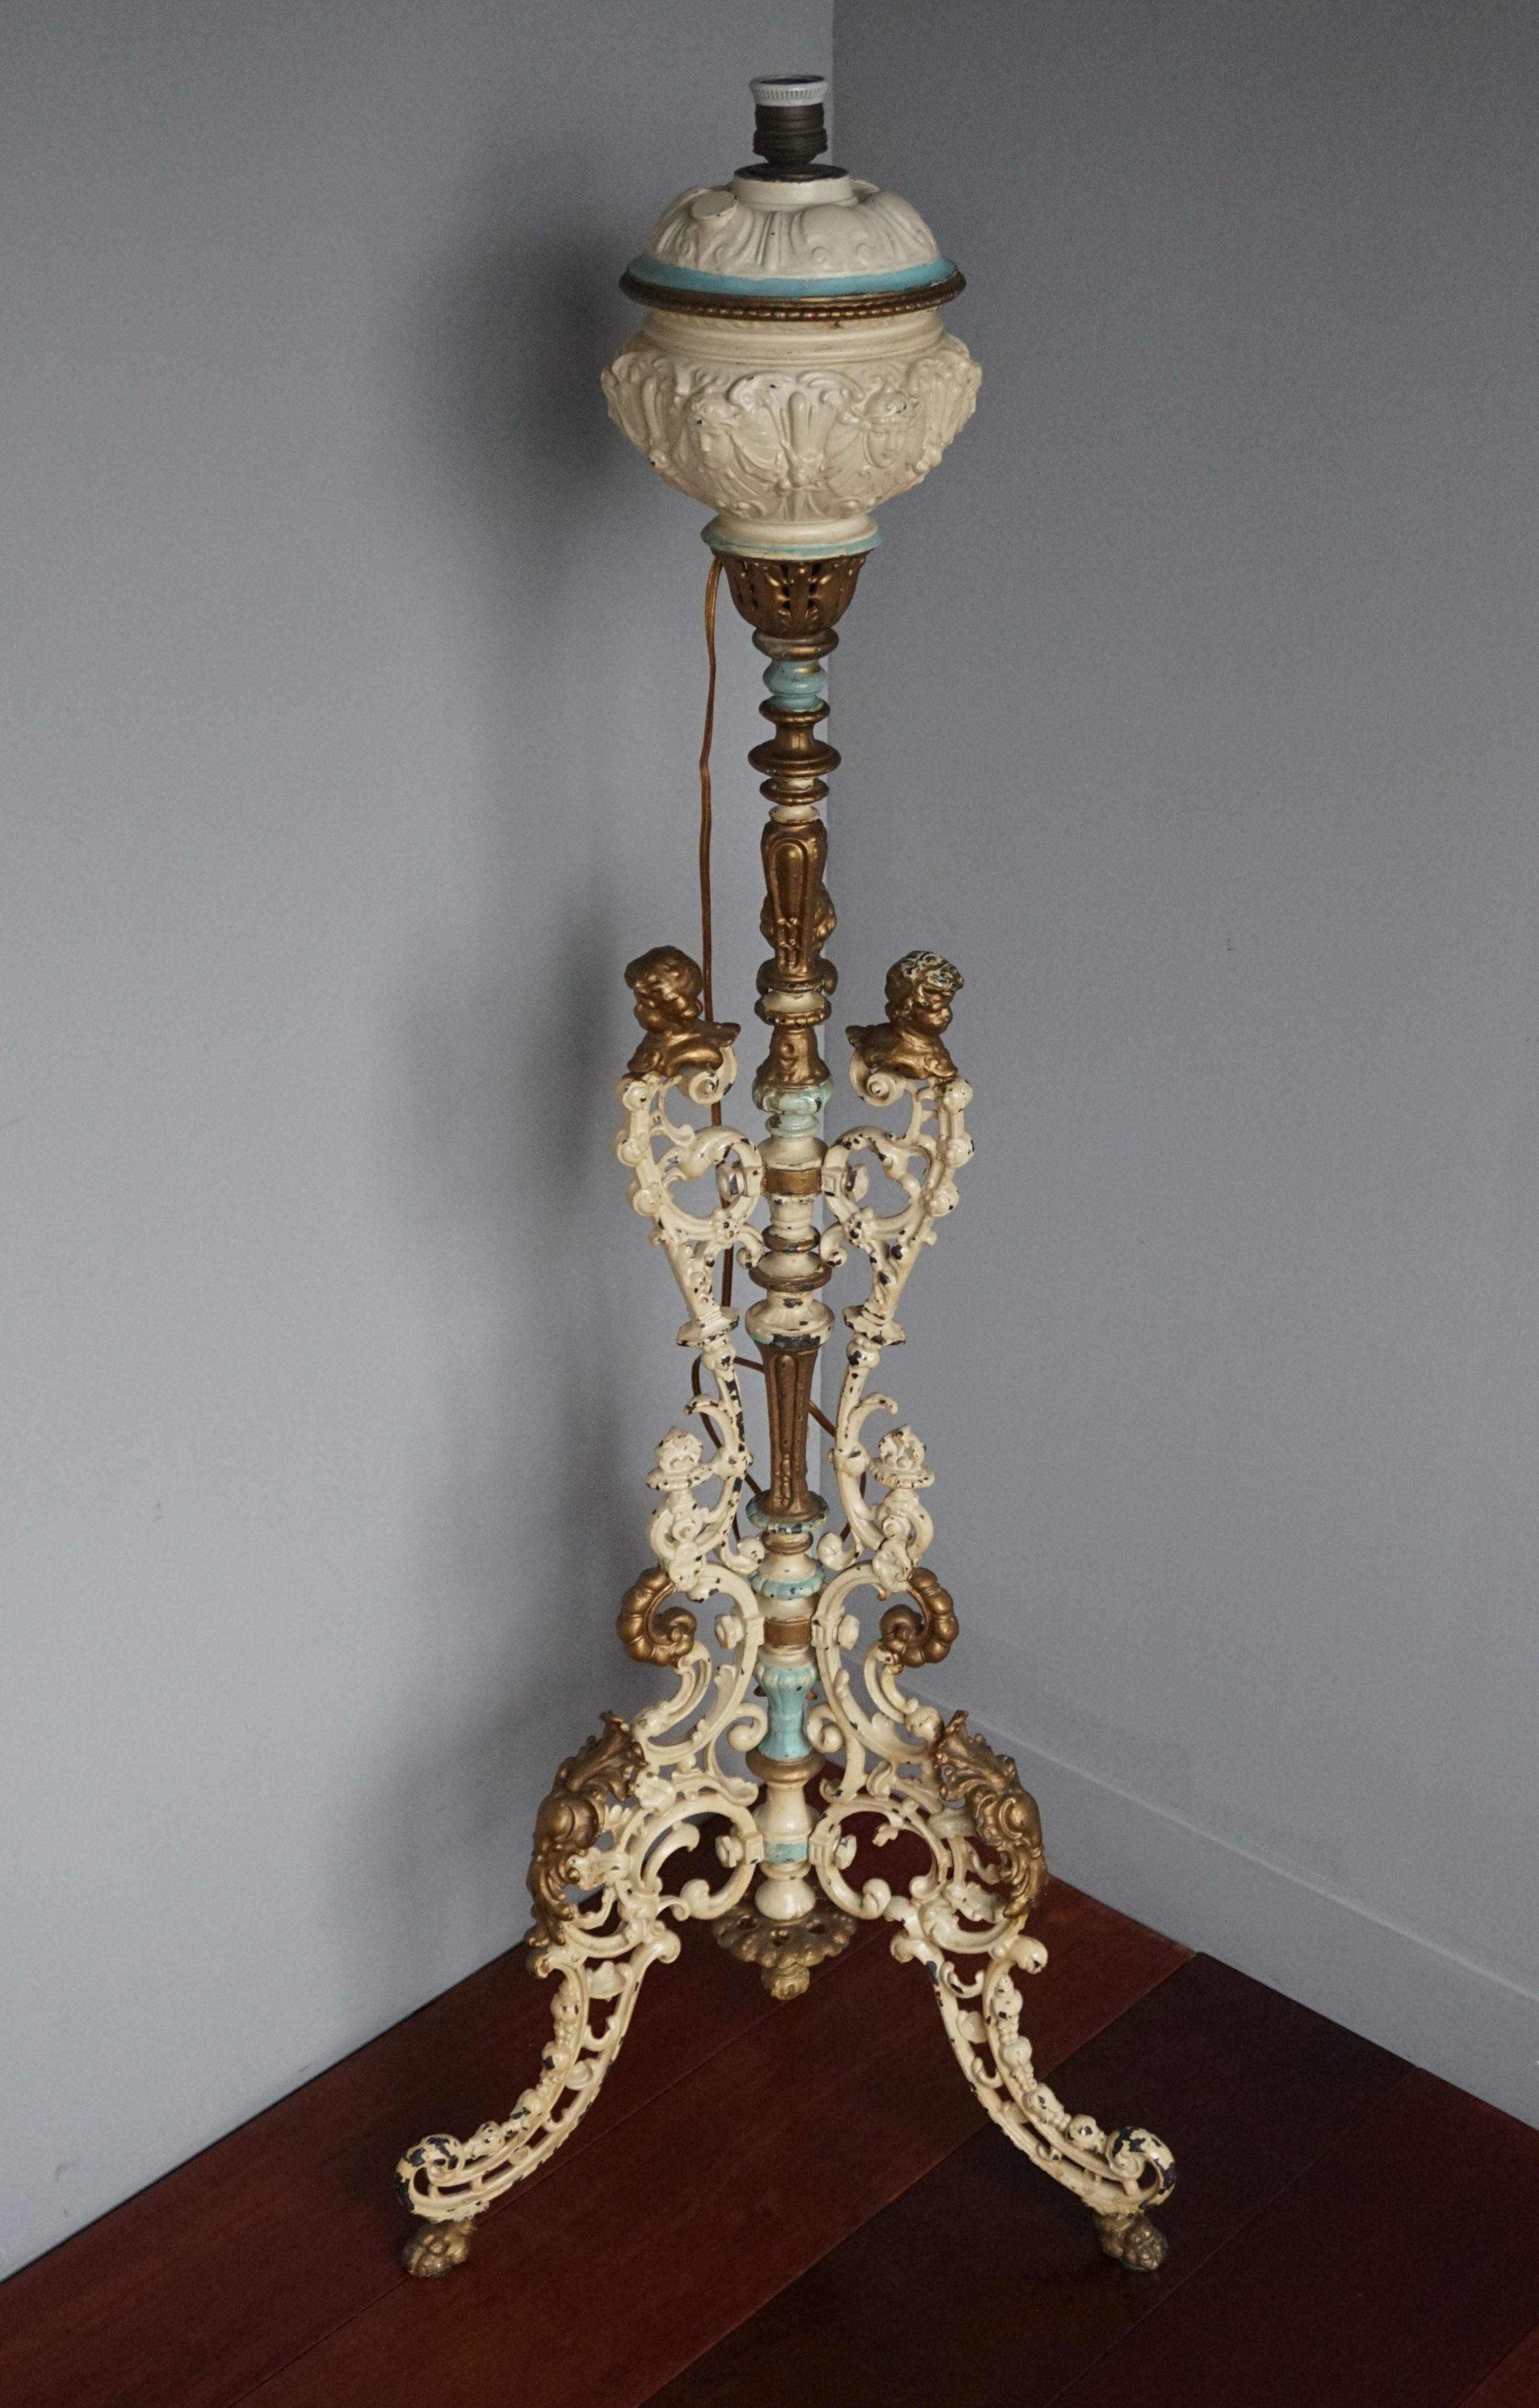 Antique and Painted Cast Iron Baroque Revival Floor Lamp w. Putti Bust Sculpture For Sale 4